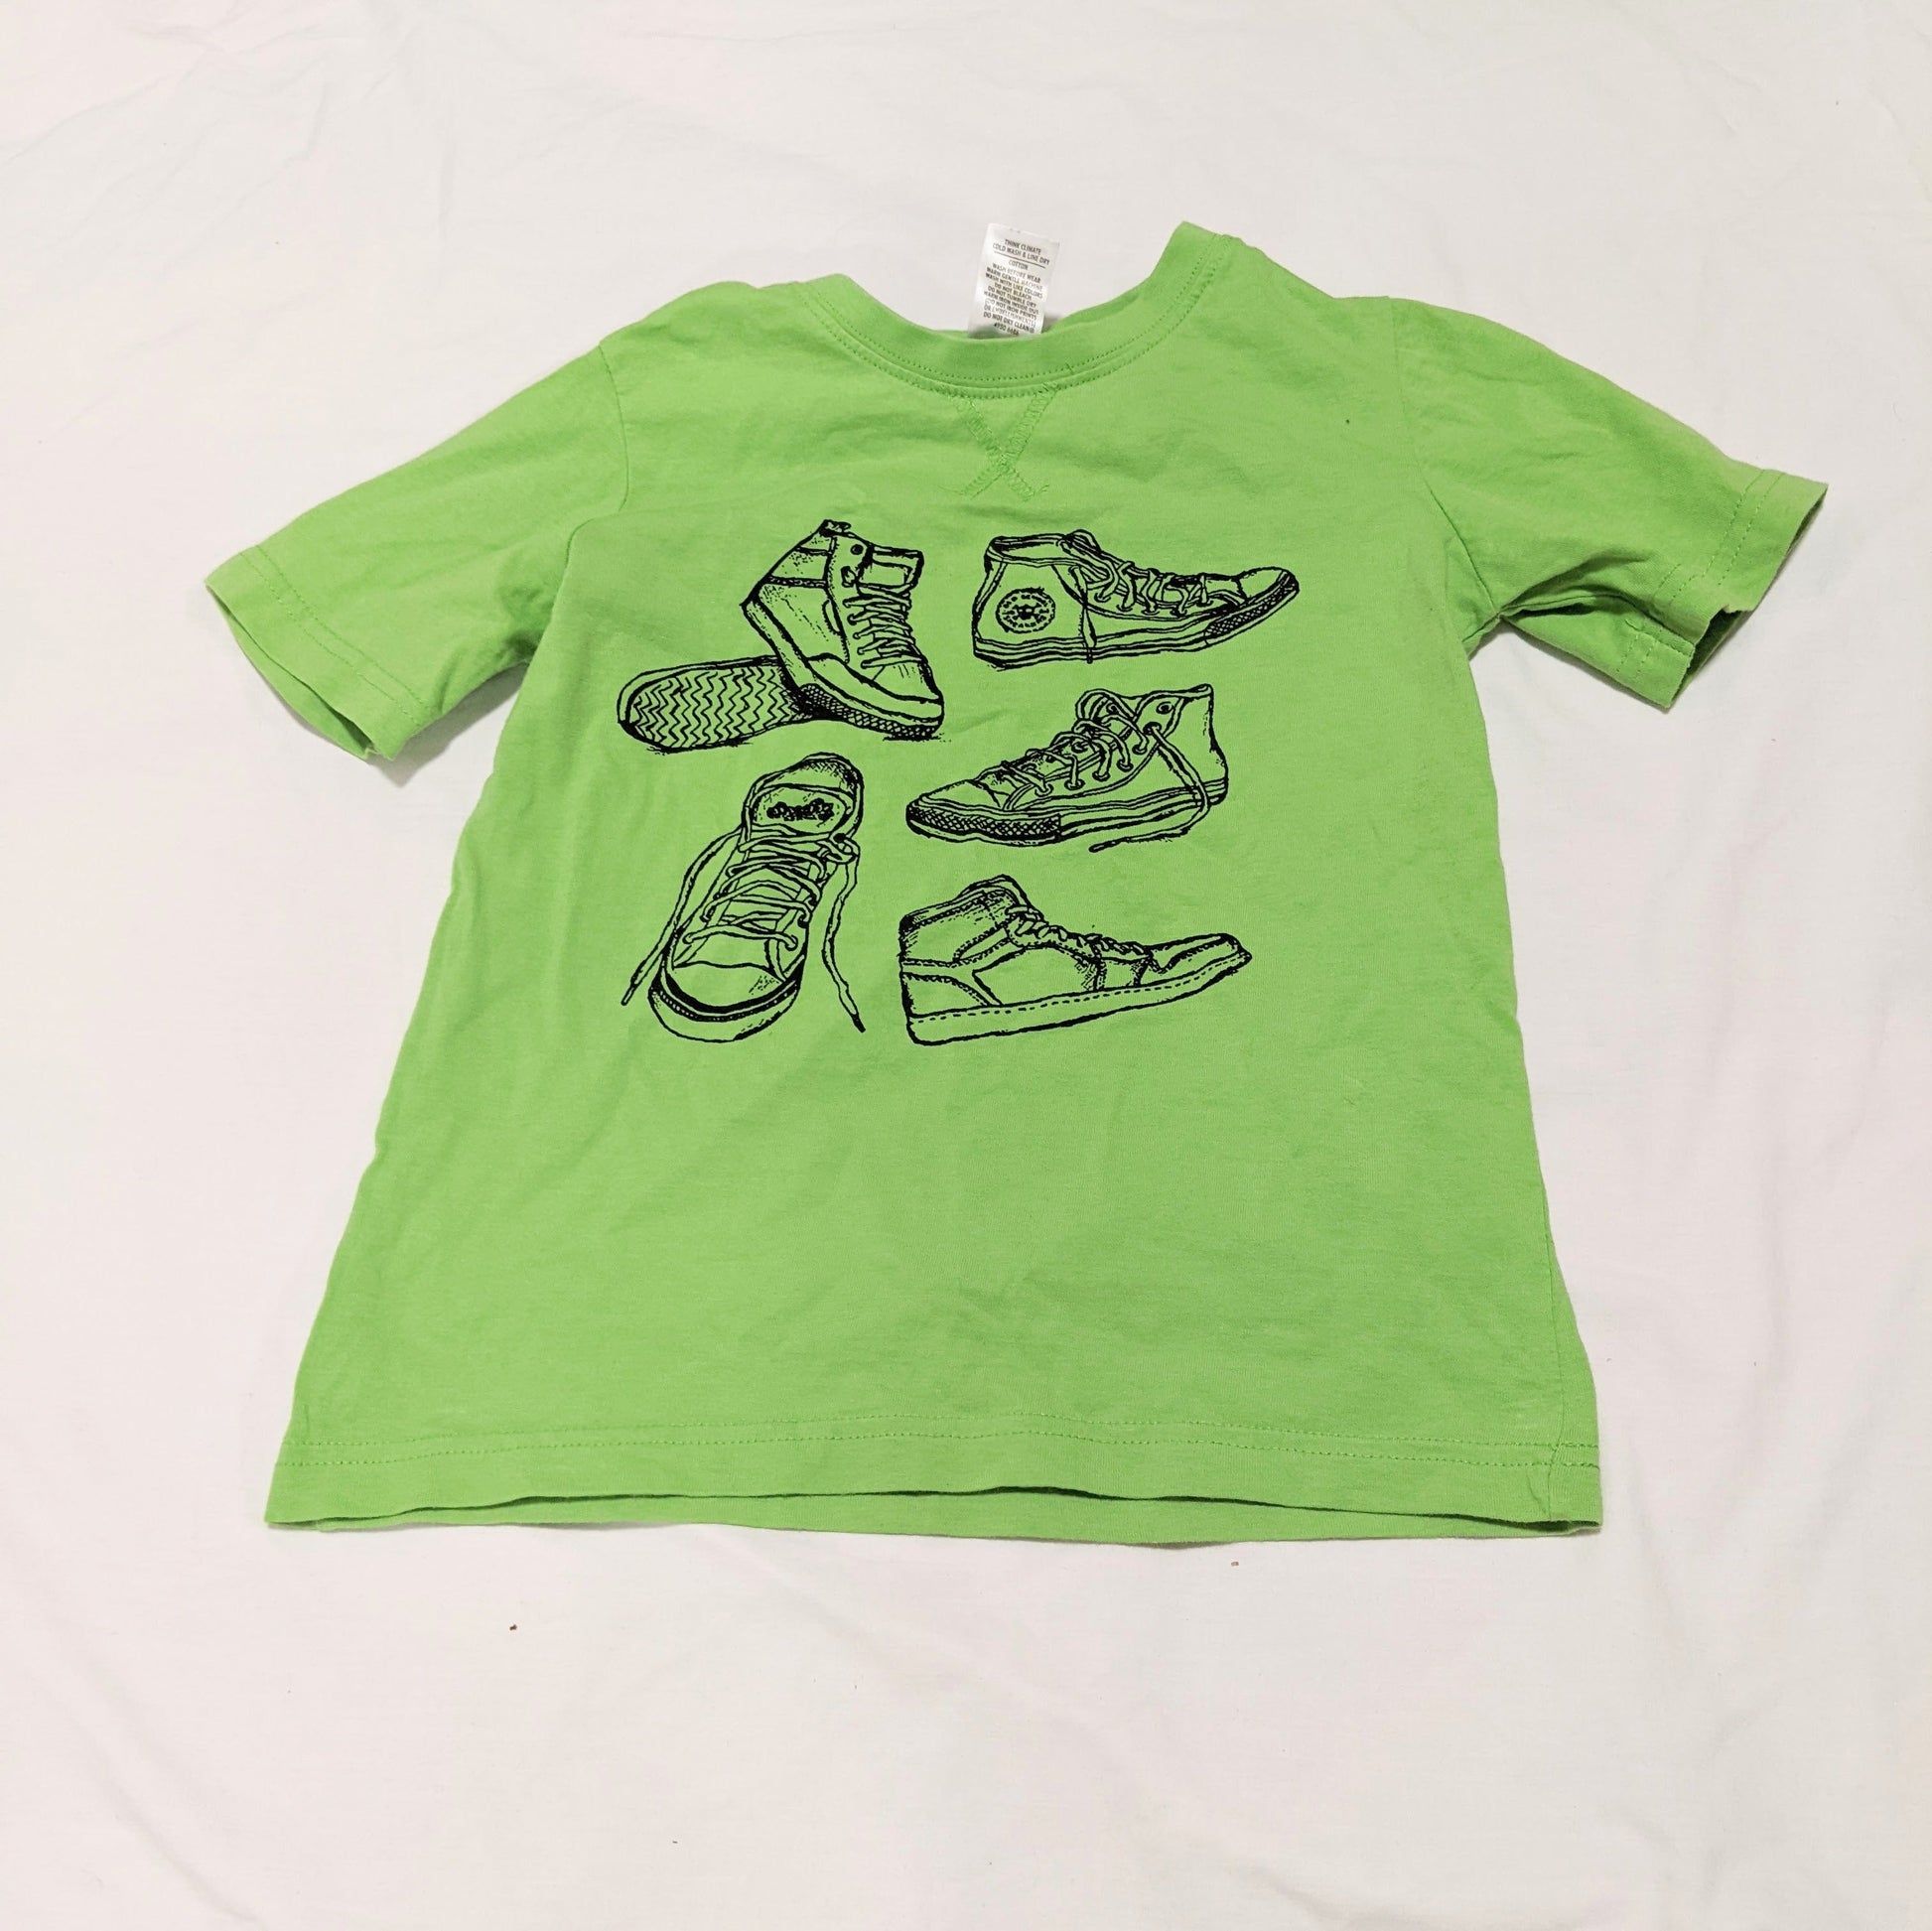 Green T-shirt with shoe design - size 5